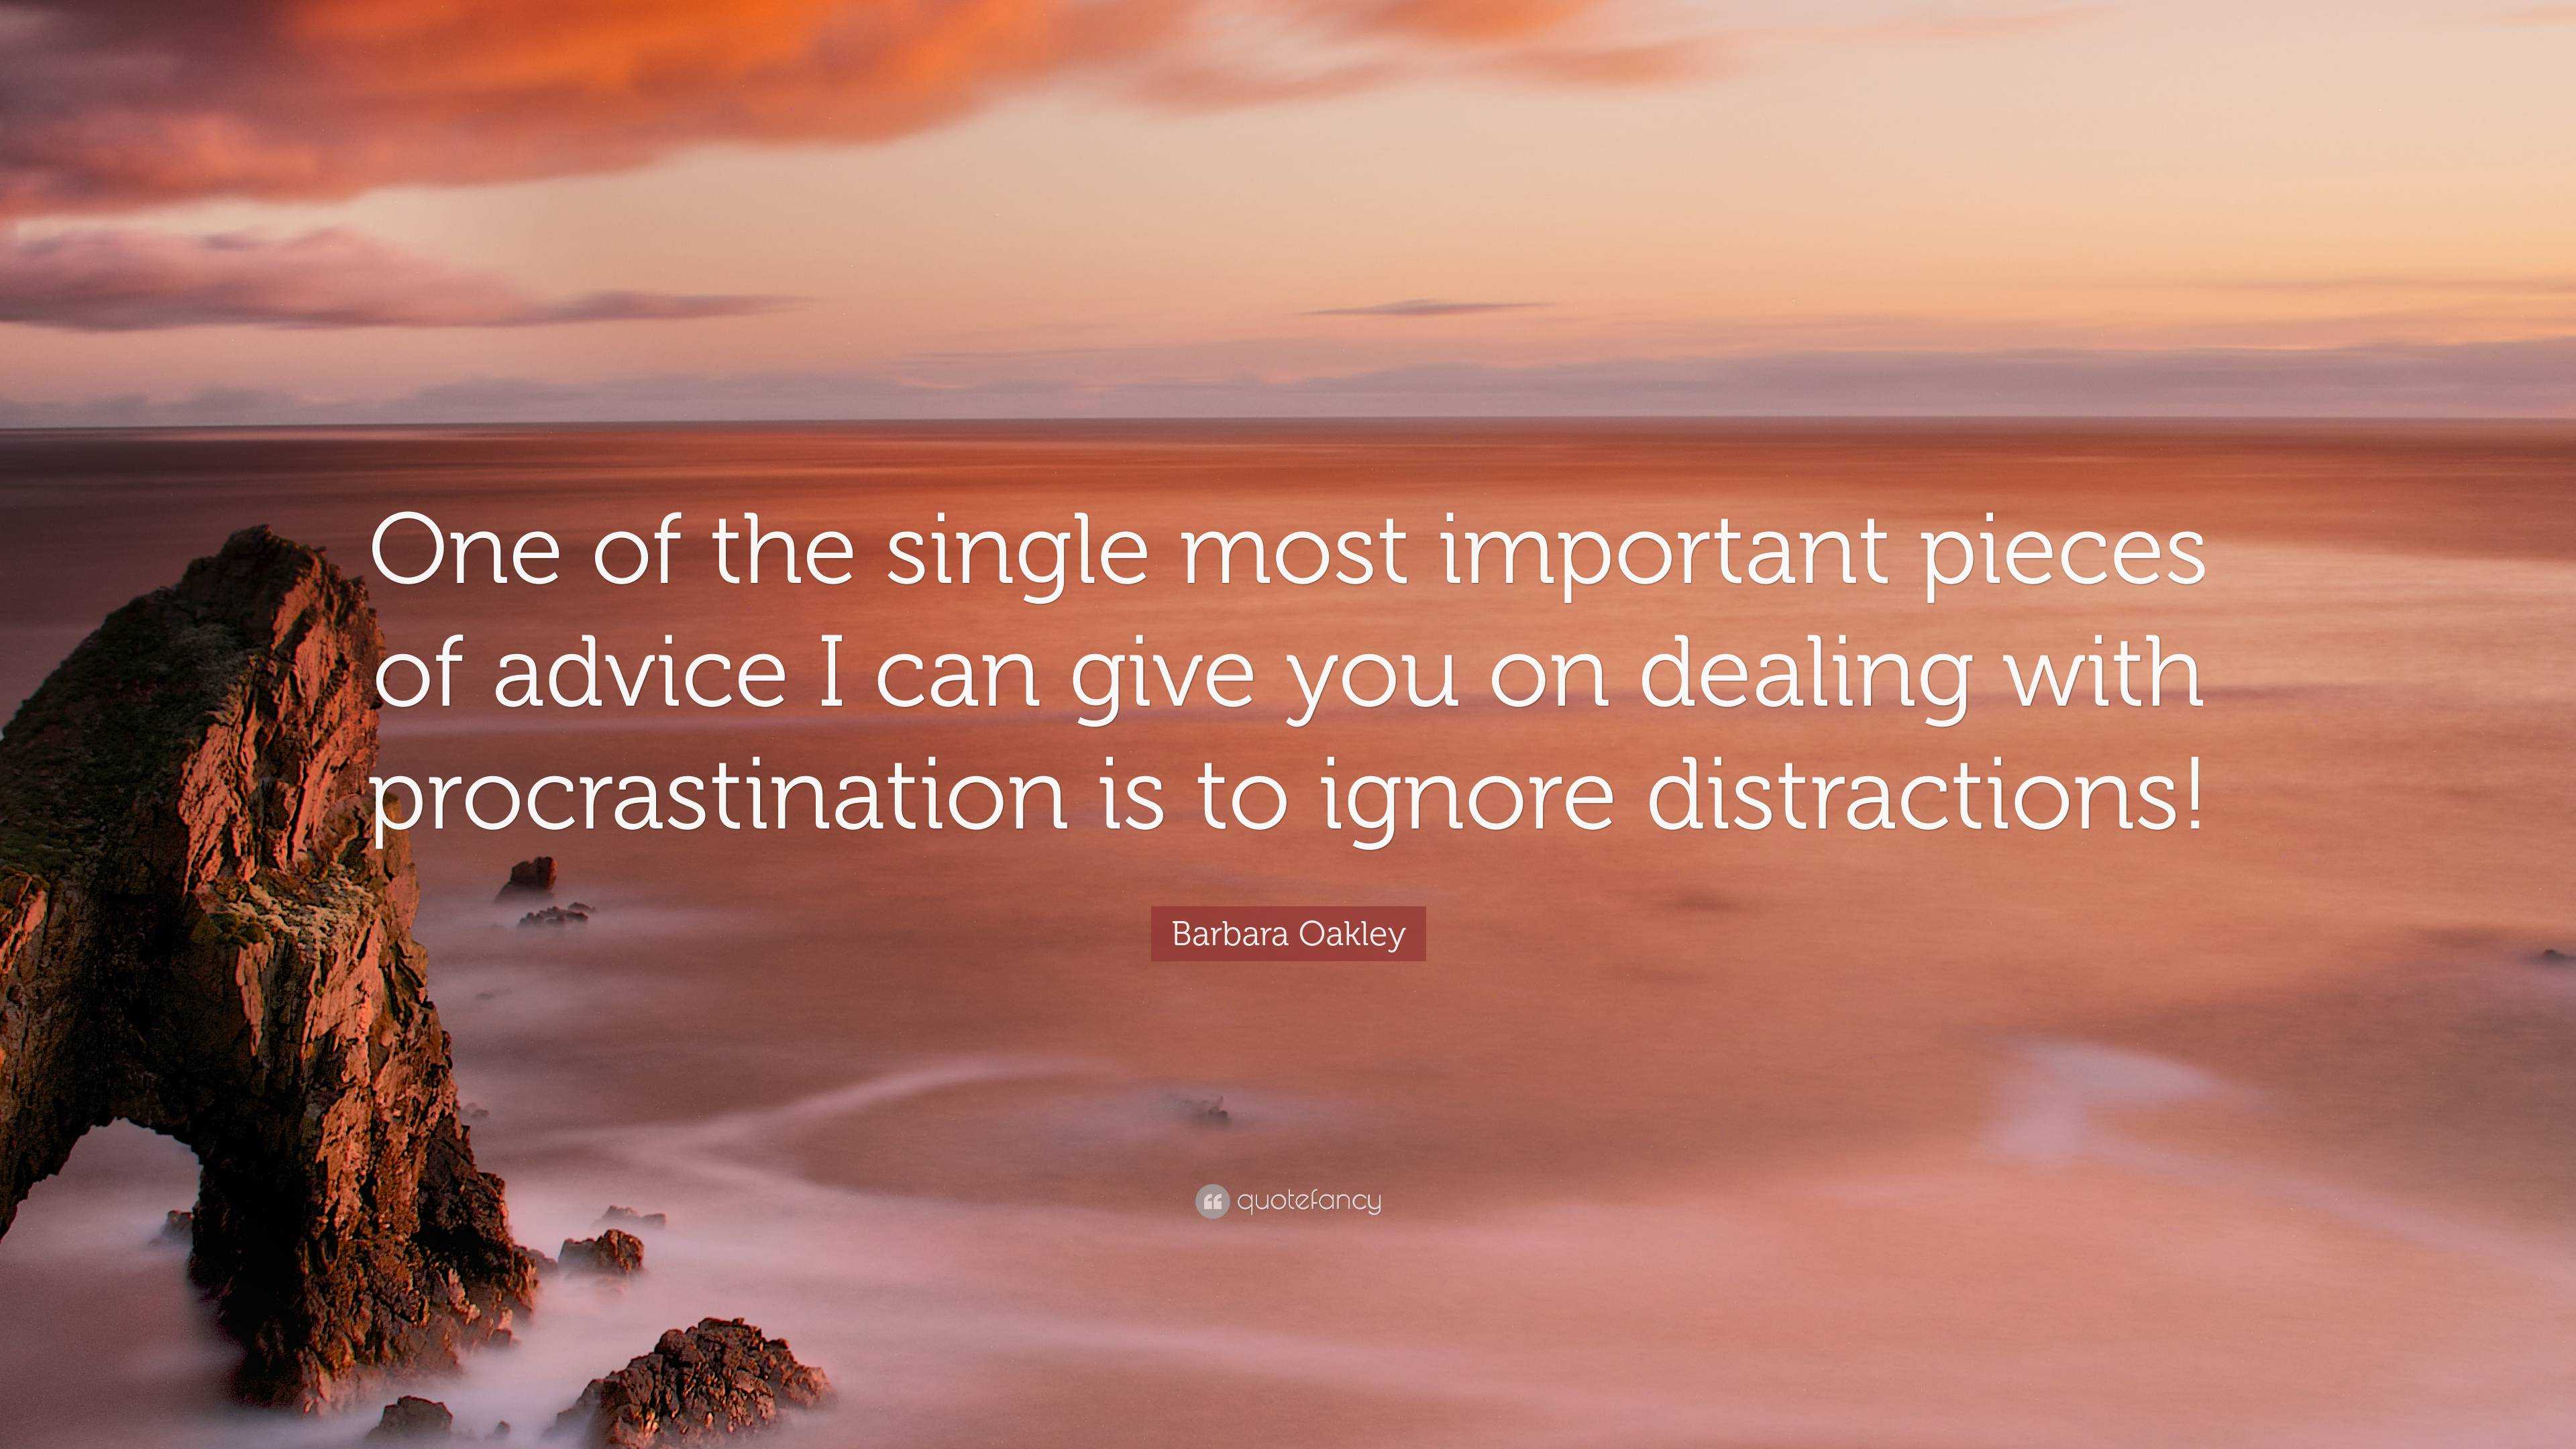 Barbara Oakley Quote: “One of the single most important pieces of advice I  can give you on dealing with procrastination is to ignore distractio...”